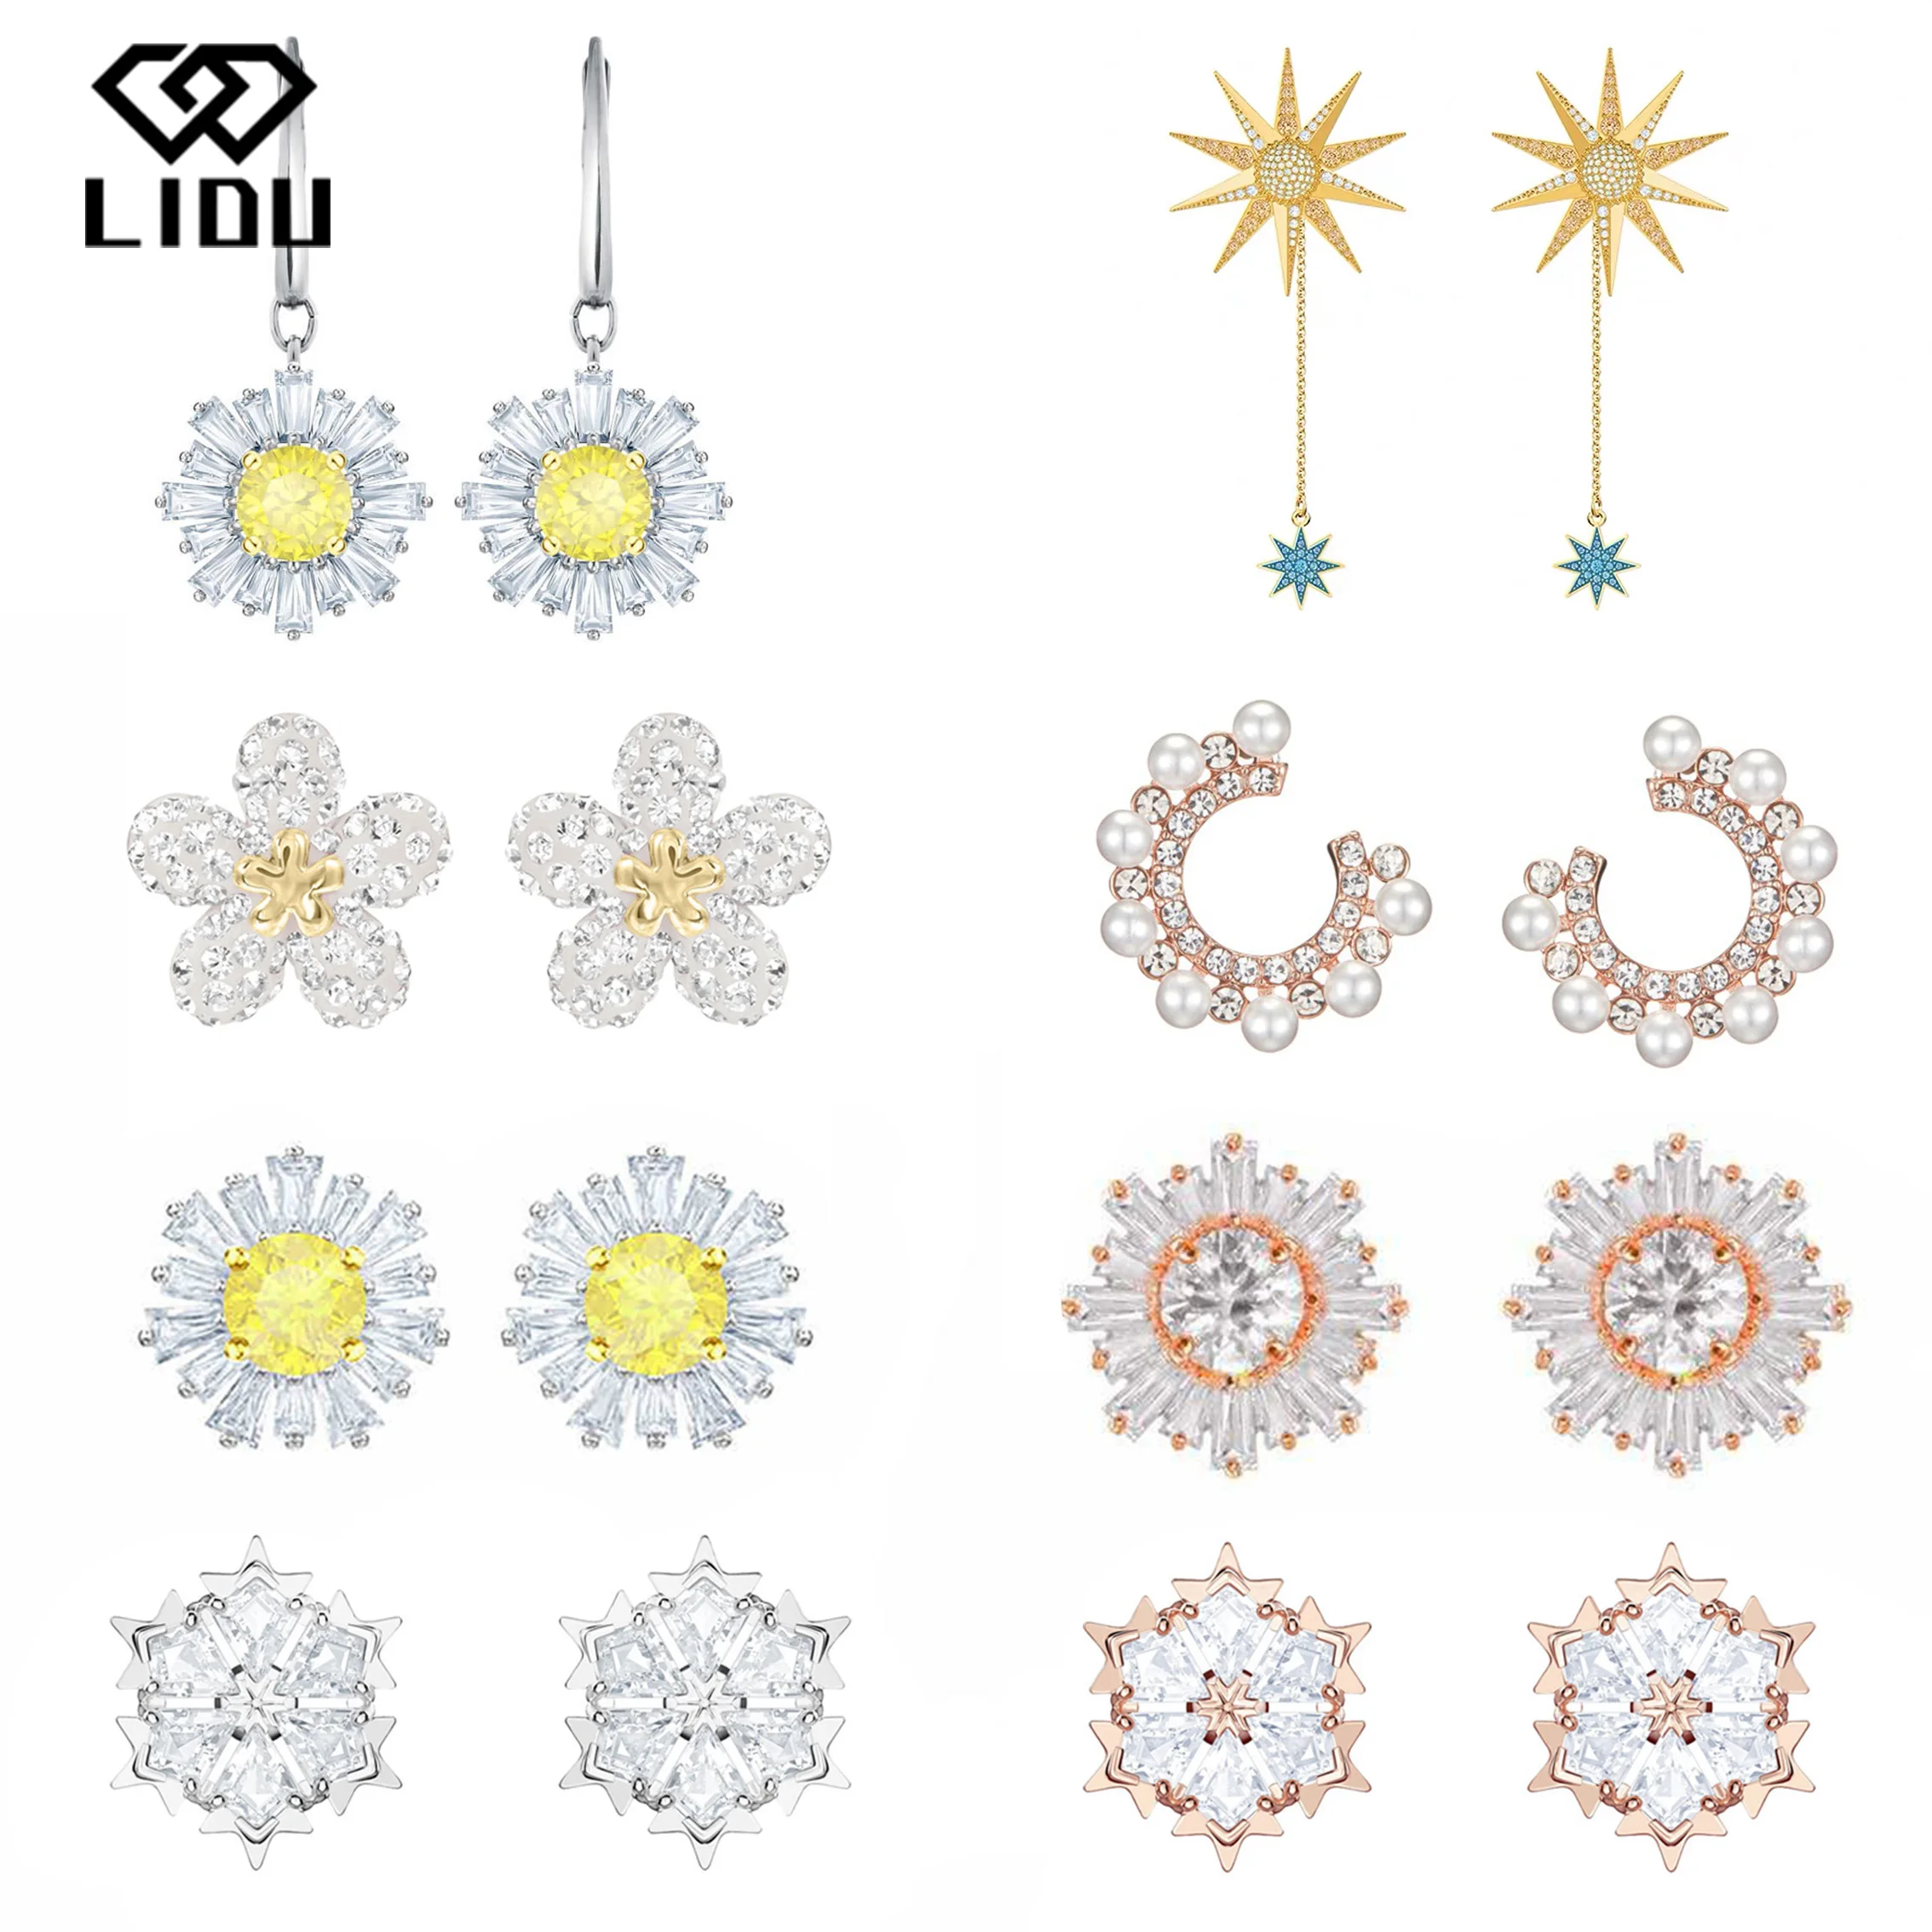 

LIDU High Quality Exquisite Fashion Flowers Sunflower Earrings Gift To Friends Free Mail Manufacturers Wholesale